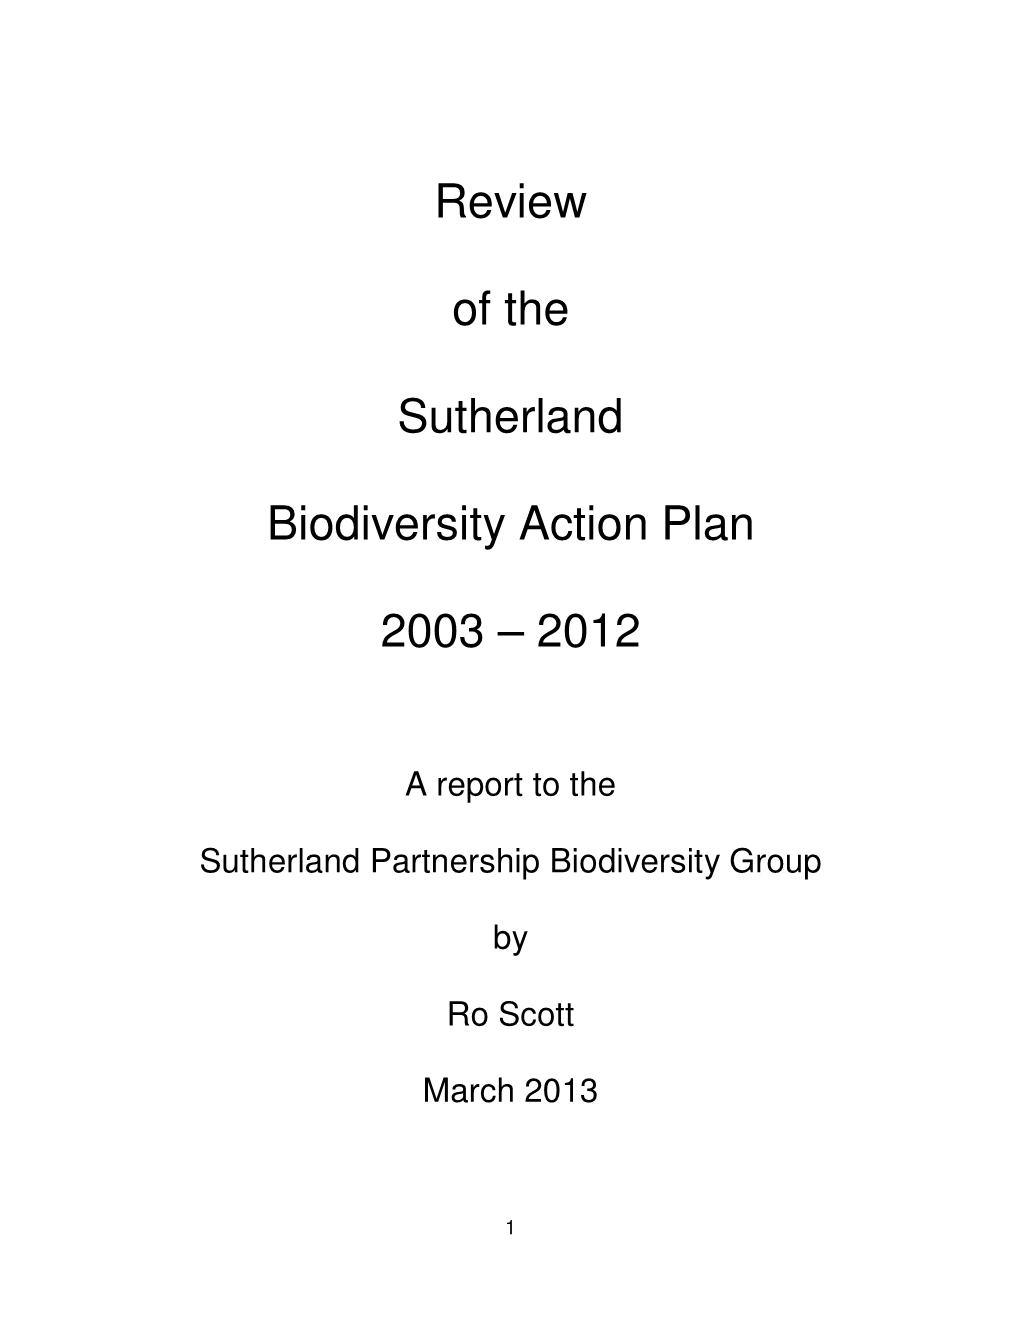 Review of the Sutherland Biodiversity Action Plan 2003 – 2012